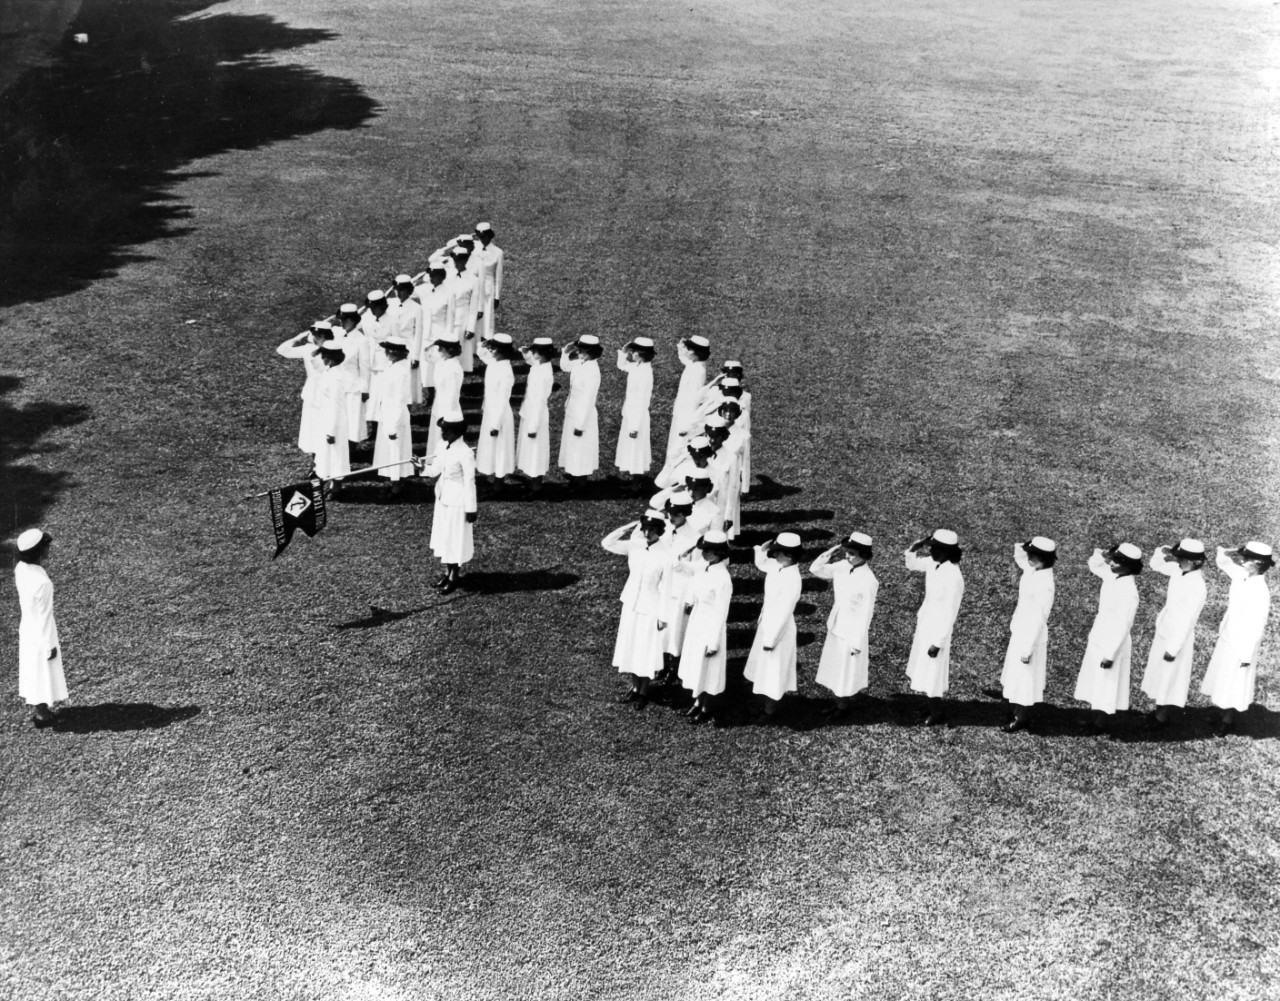 USN 708655:   Ten Years of the WAVY Blue, July 1952.   Drill Team.   The WAVES have been famous for their drill teams, one of which was recently featured in a movie.  The WAVE Drill Team of the Naval Training Center at Bainbridge, Maryland, sticks out as they begin one of the many formations executed by the 34 WAVE Trainees.  This drill formation, like the formations used going to classes, help the nautically minded women volunteers to better understand the necessity for a smart trim unit needed to win the competitive honors awarded WAVE companies going through their “Boot Camp.”  Photograph released July 24, 1952.  Official U.S. Navy photograph, now in the collections of the National Archives.  